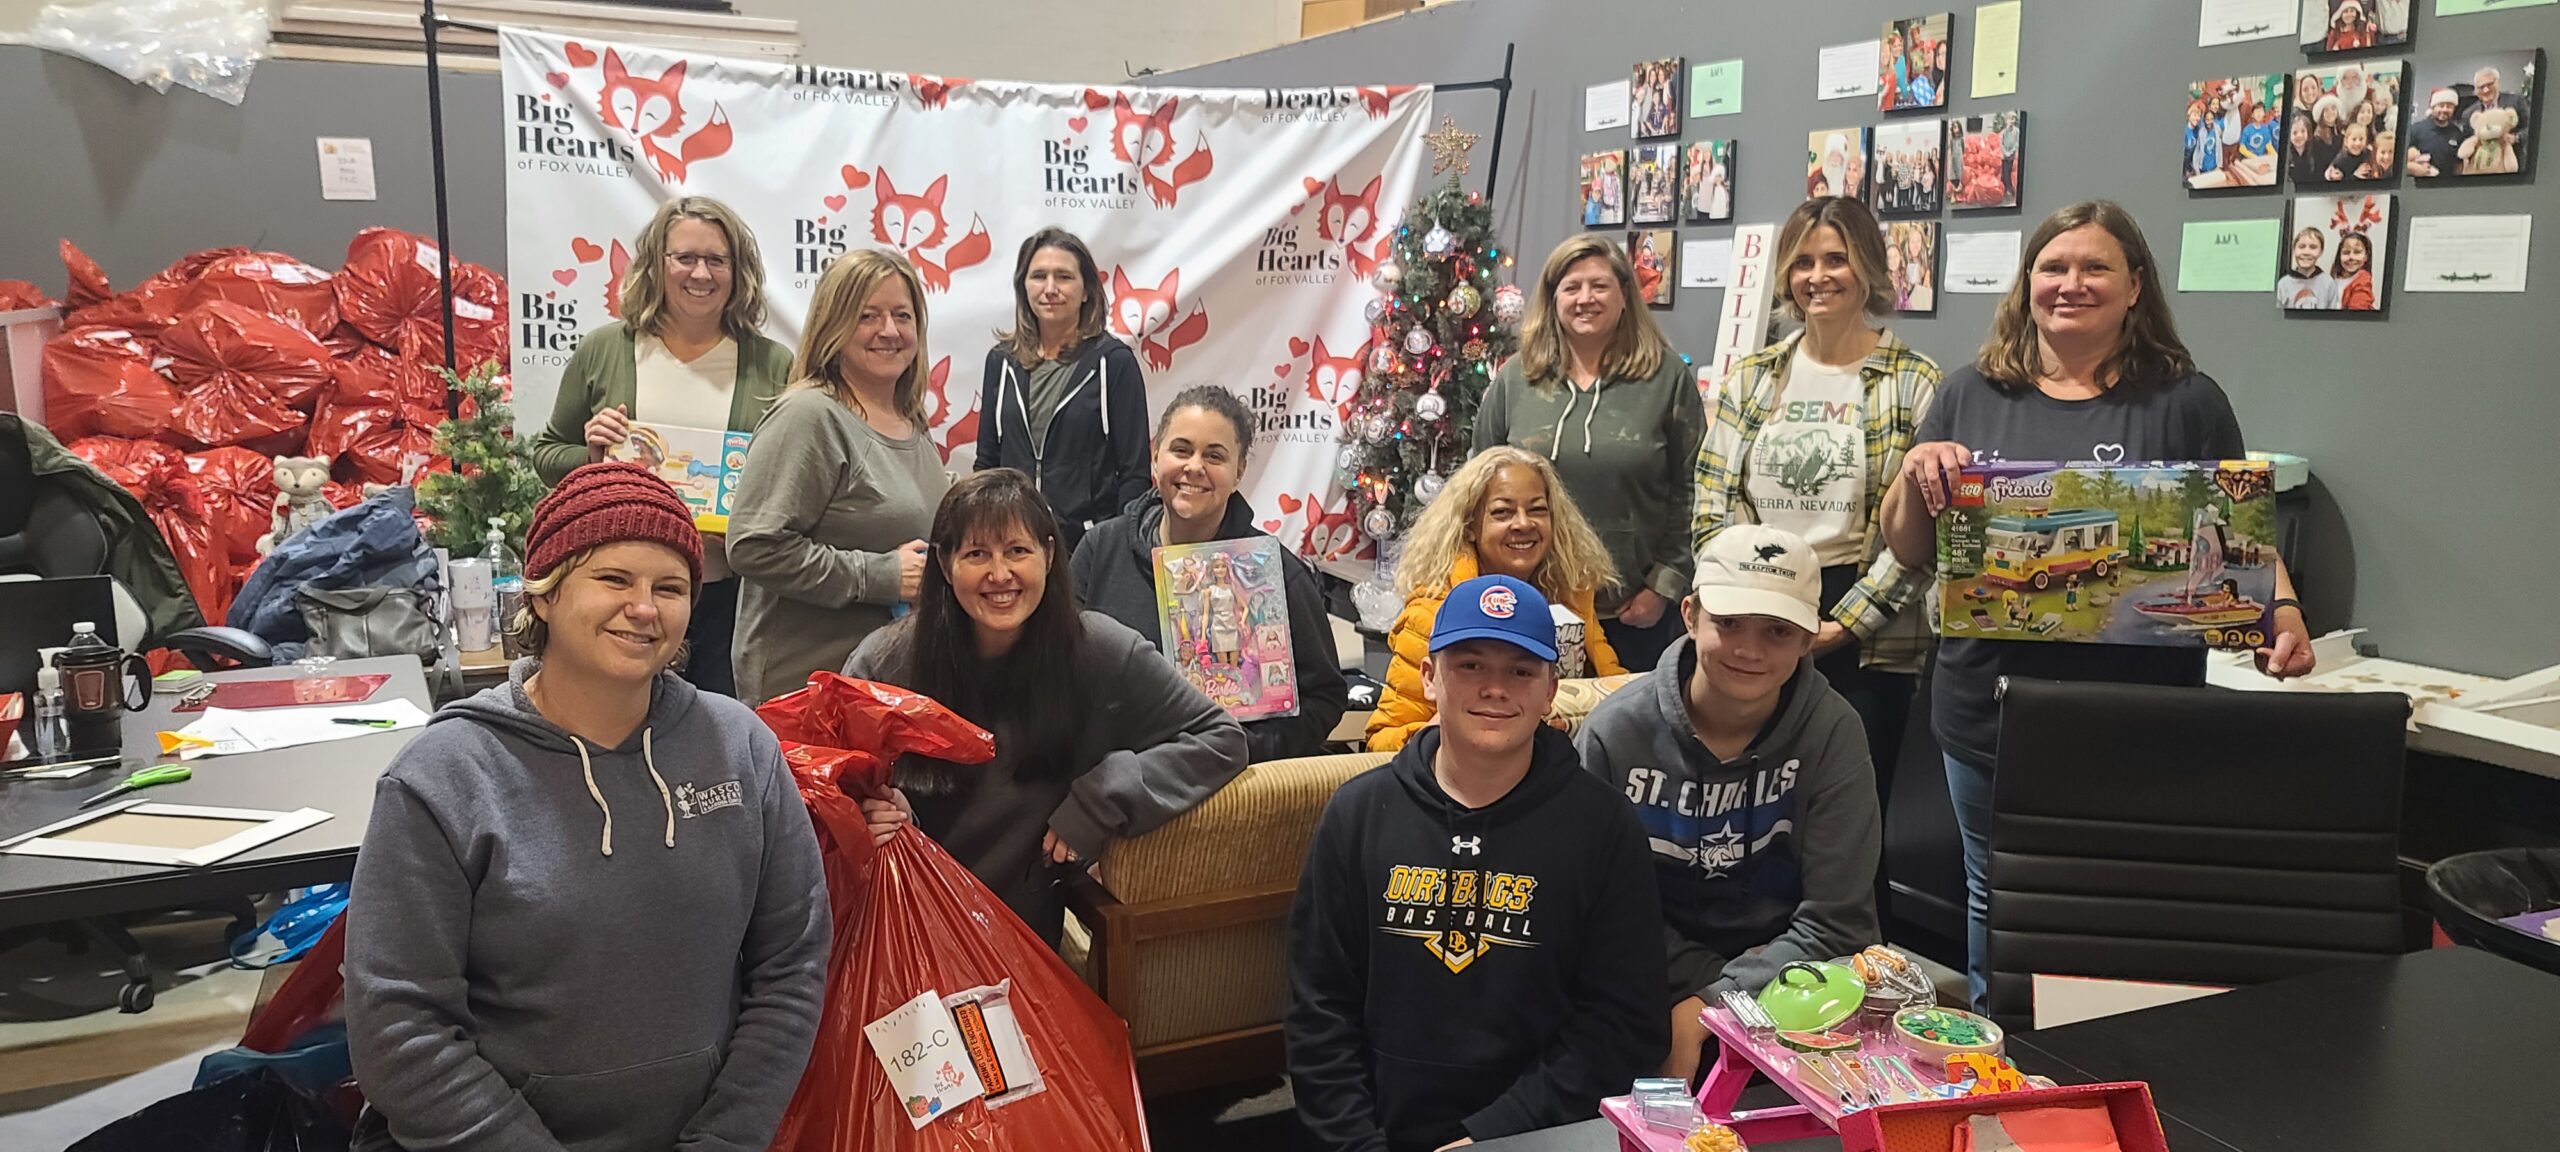 Big Hearts of Fox Valley continues to help St. Charles School District families in need